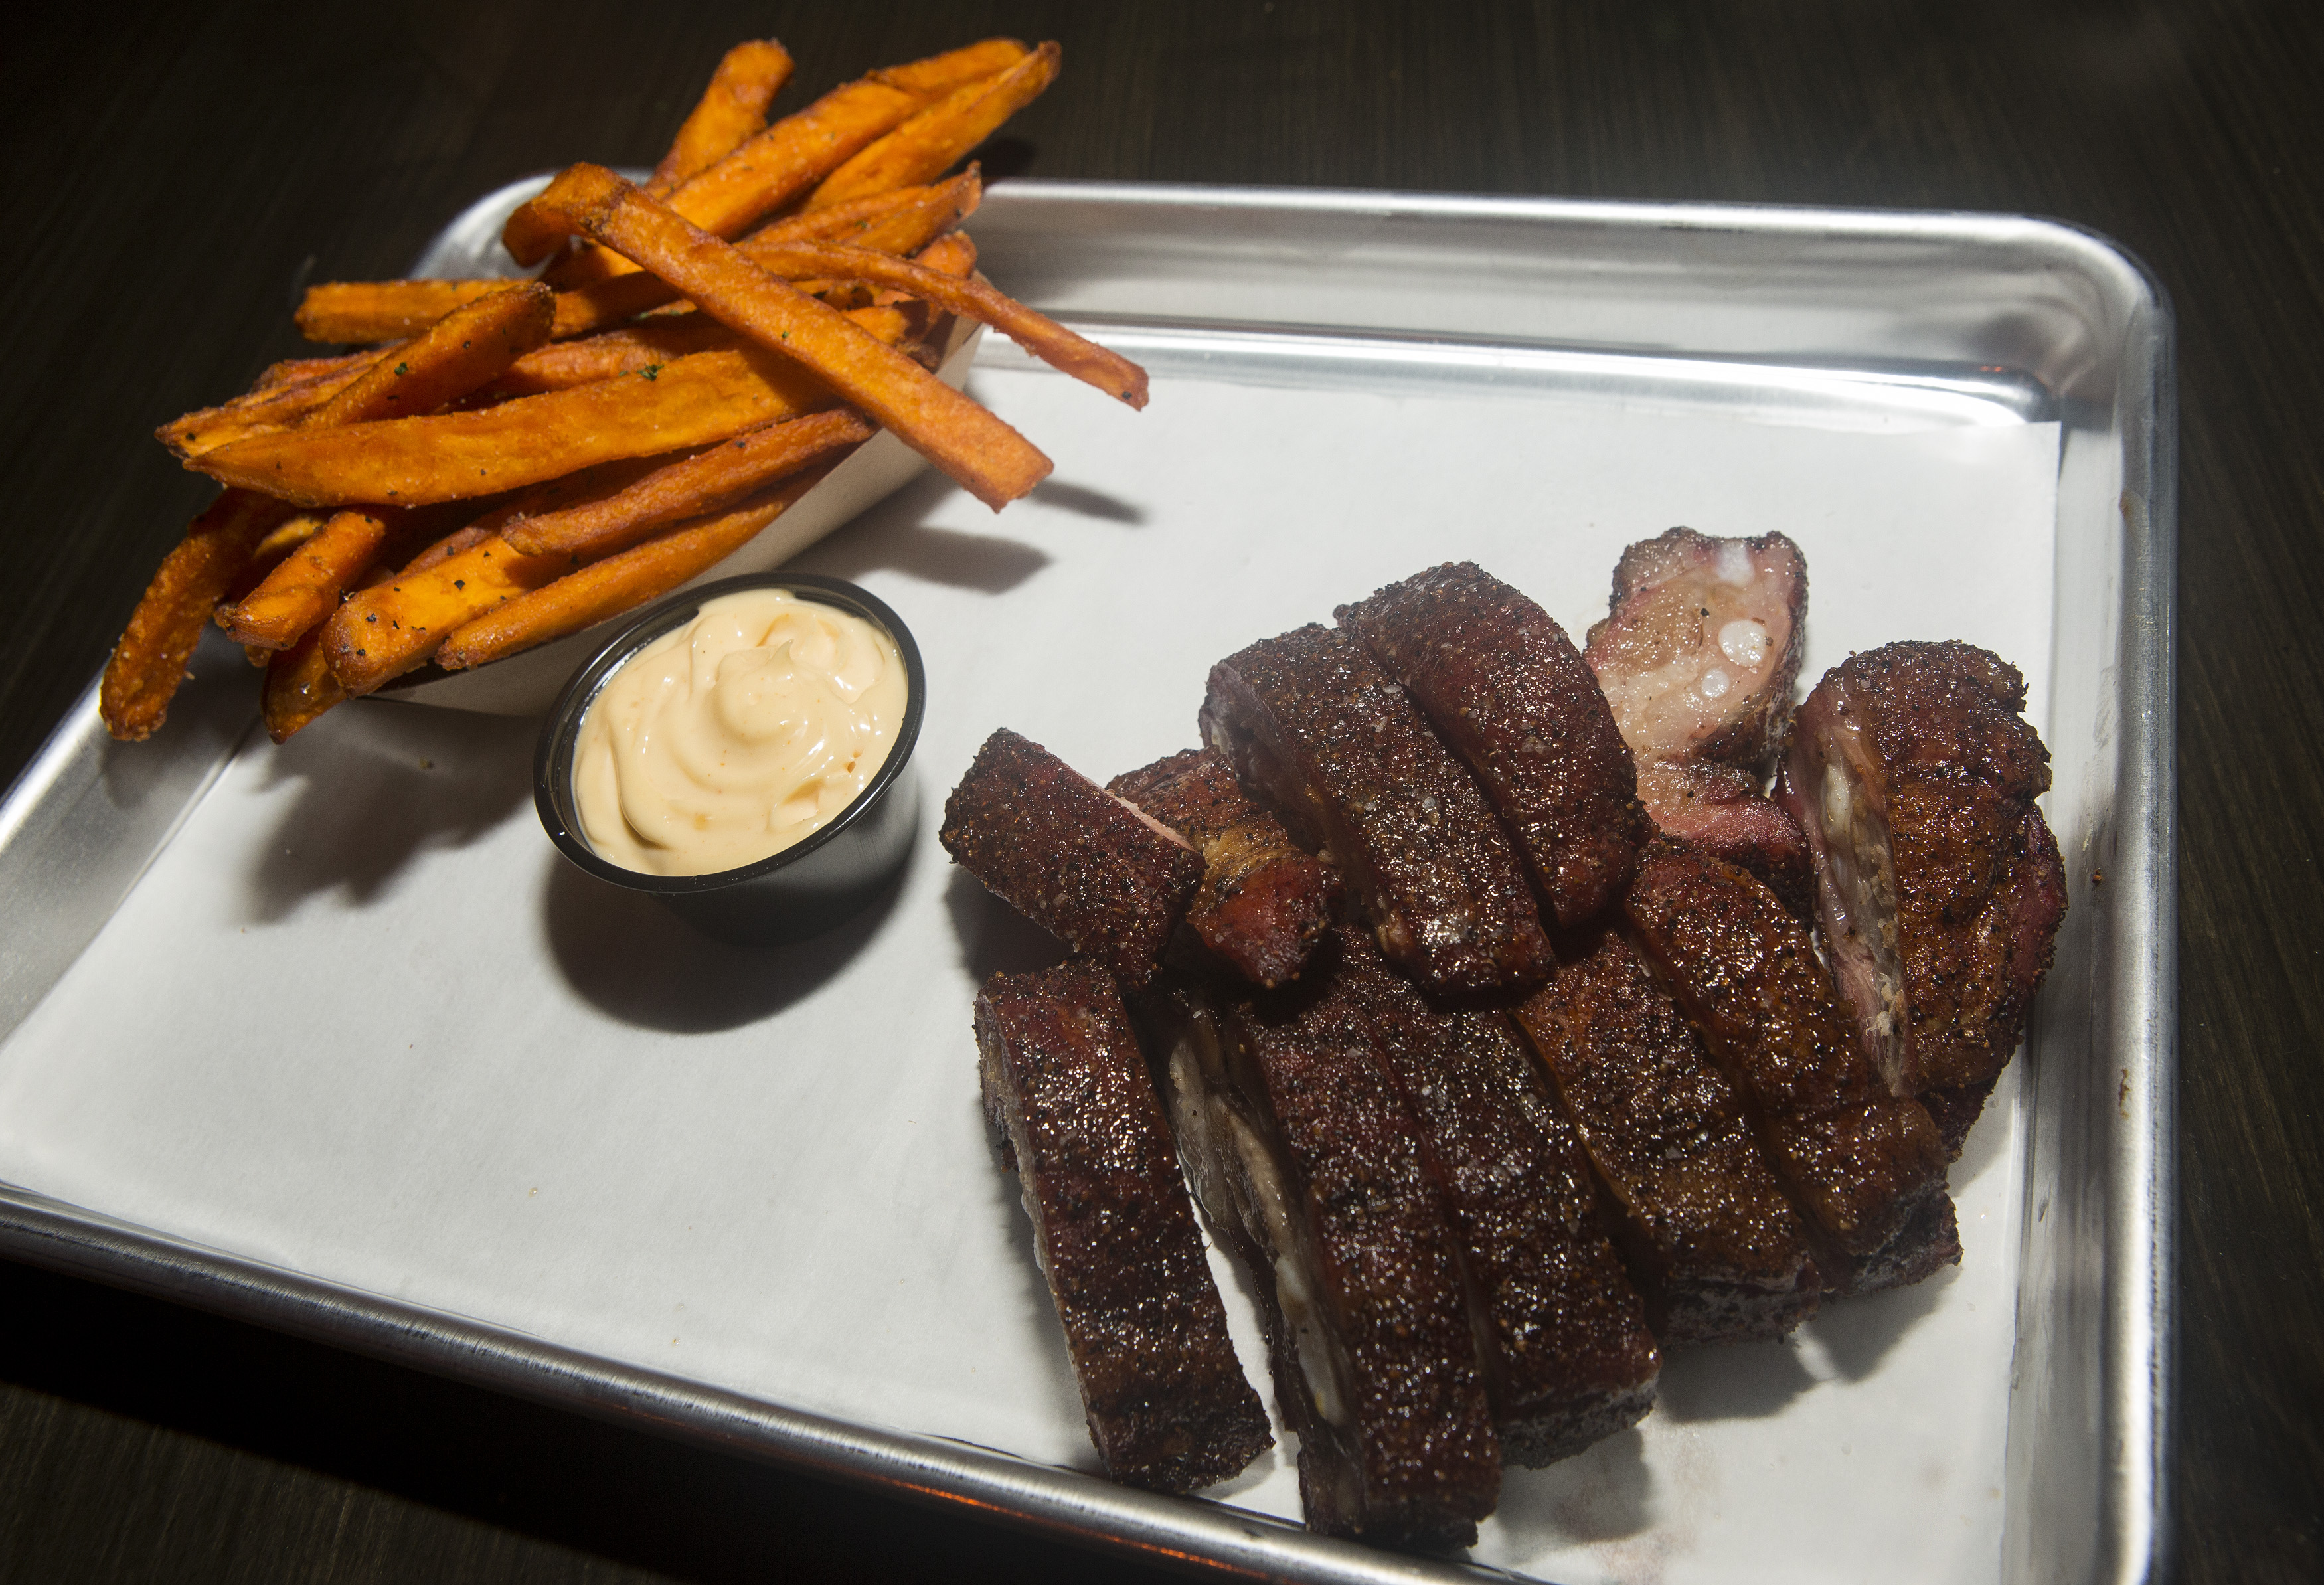 A platter of baby back ribs and sweet potato fries.